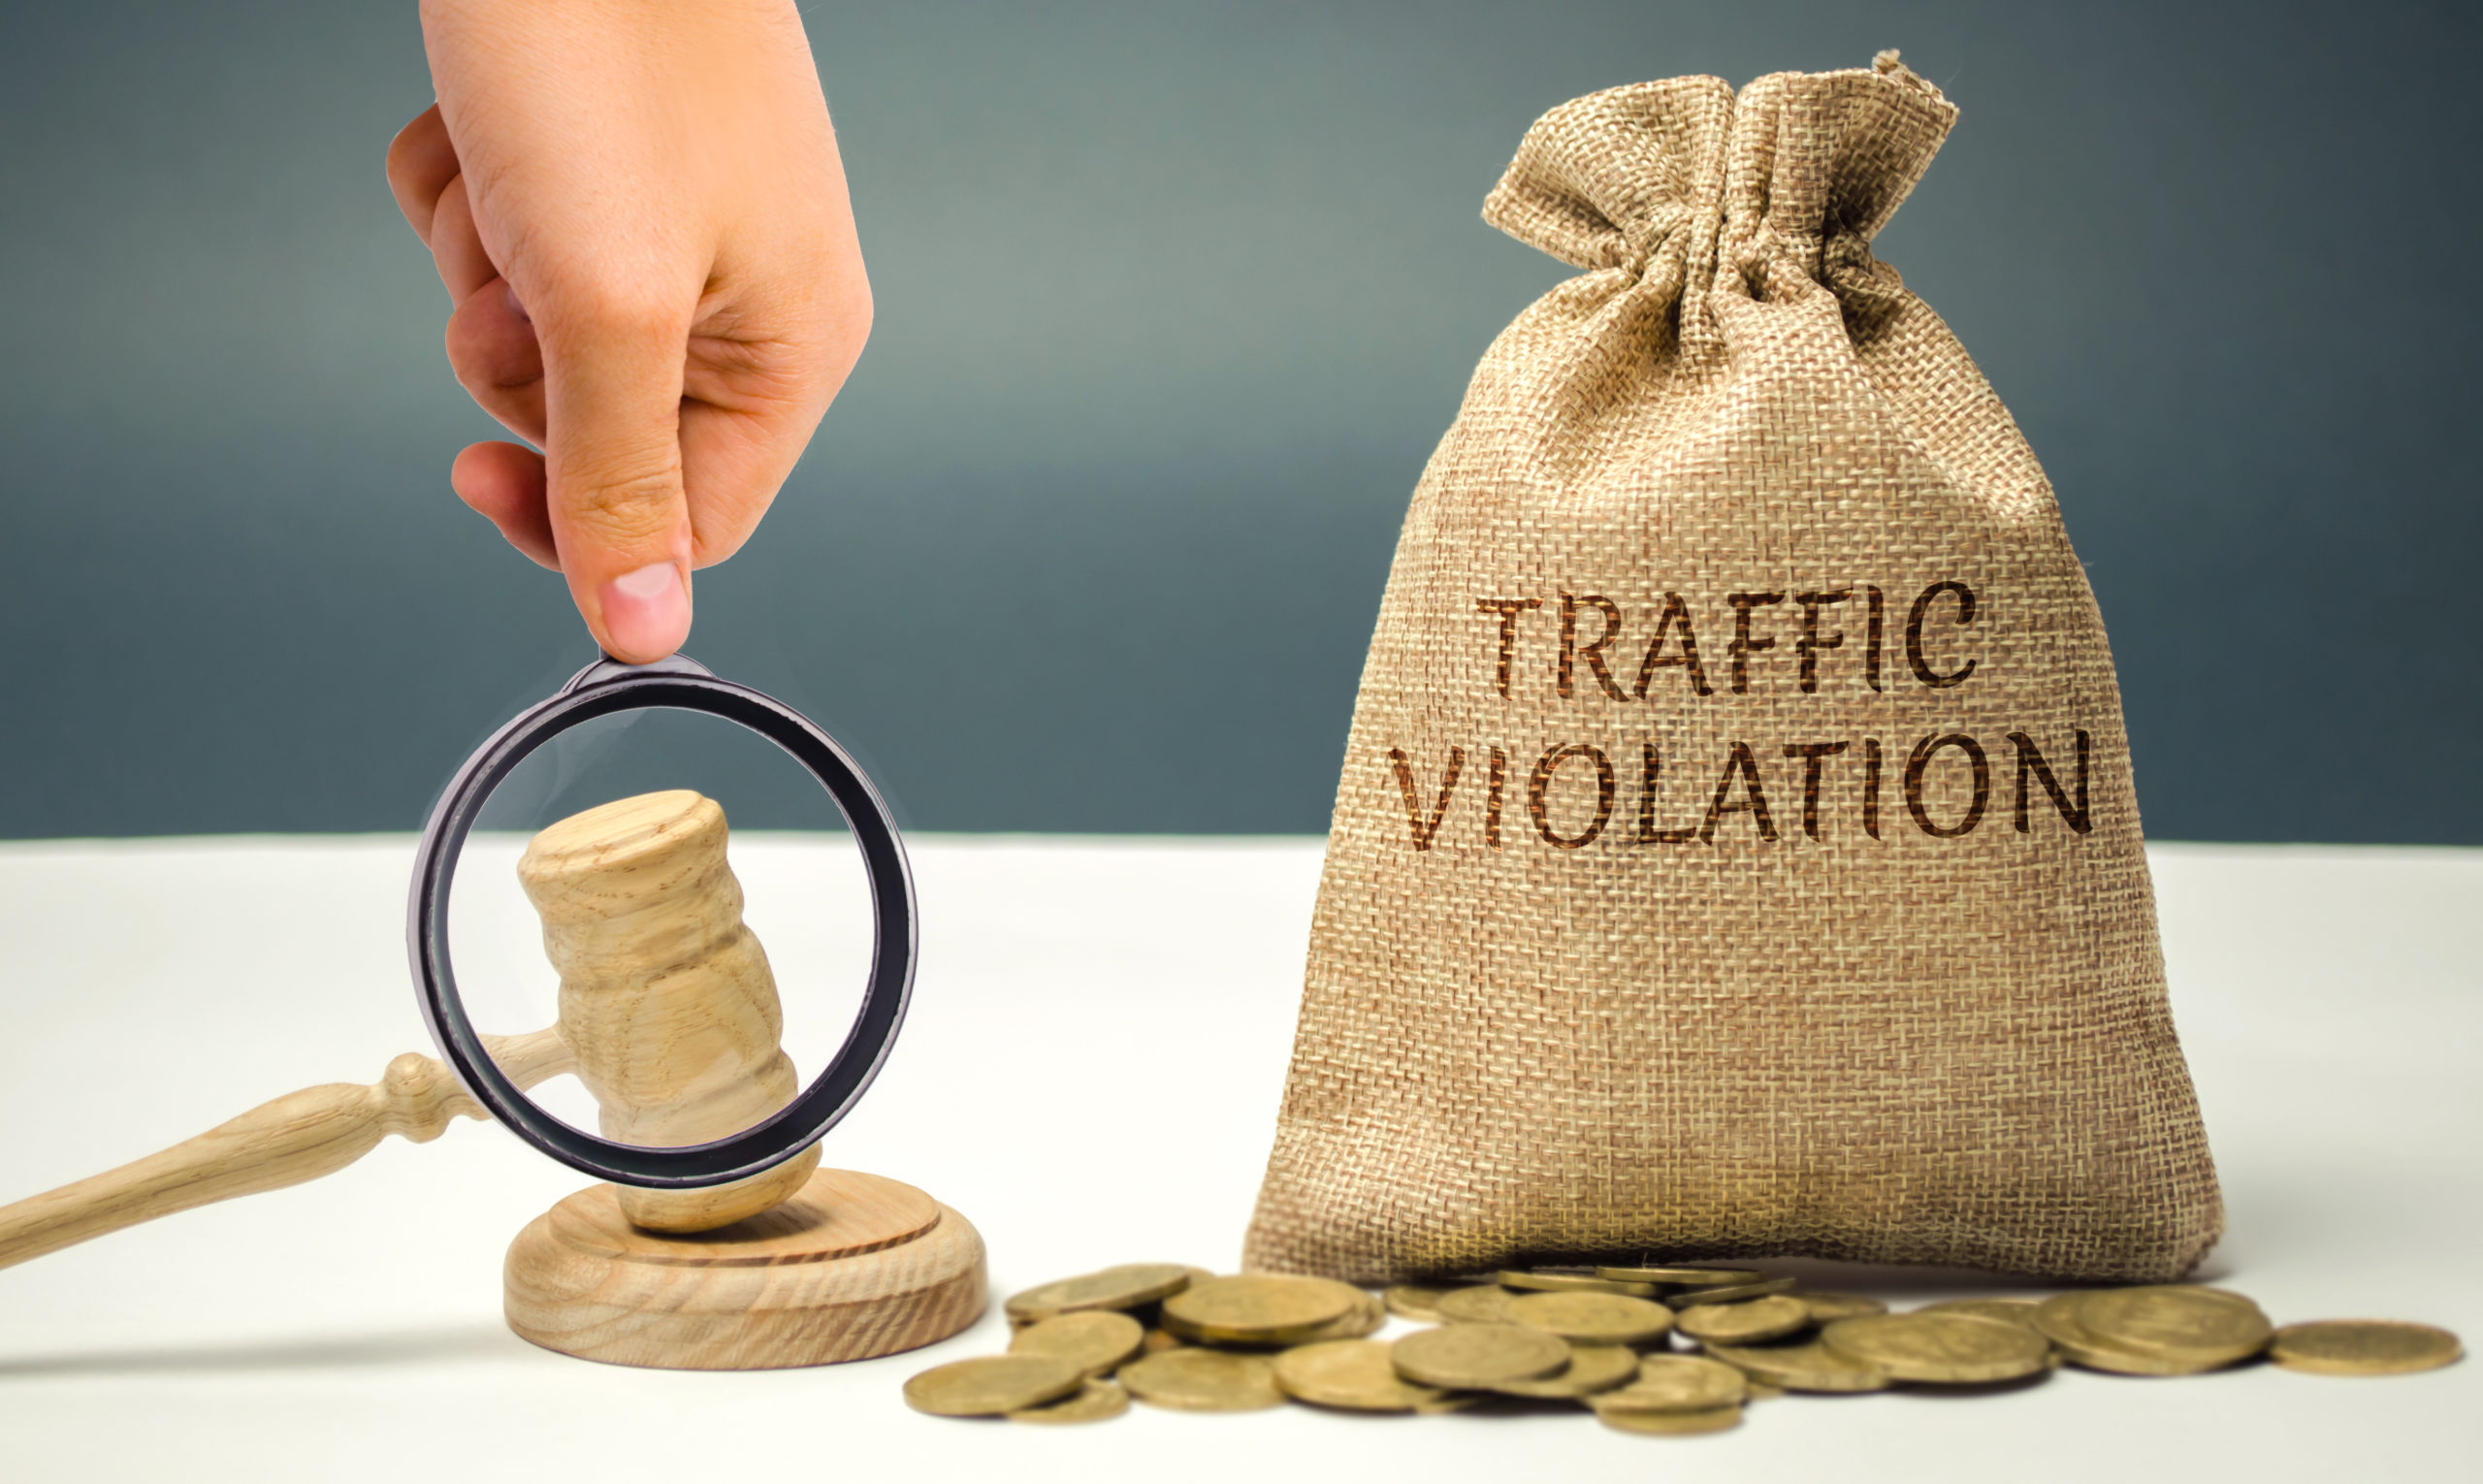 Besides the most common concern of a large fine and points, traffic tickets can also carry many more serious consequences such as suspension of driving privileges, exorbitant insurance increases and even the possibility of jail.